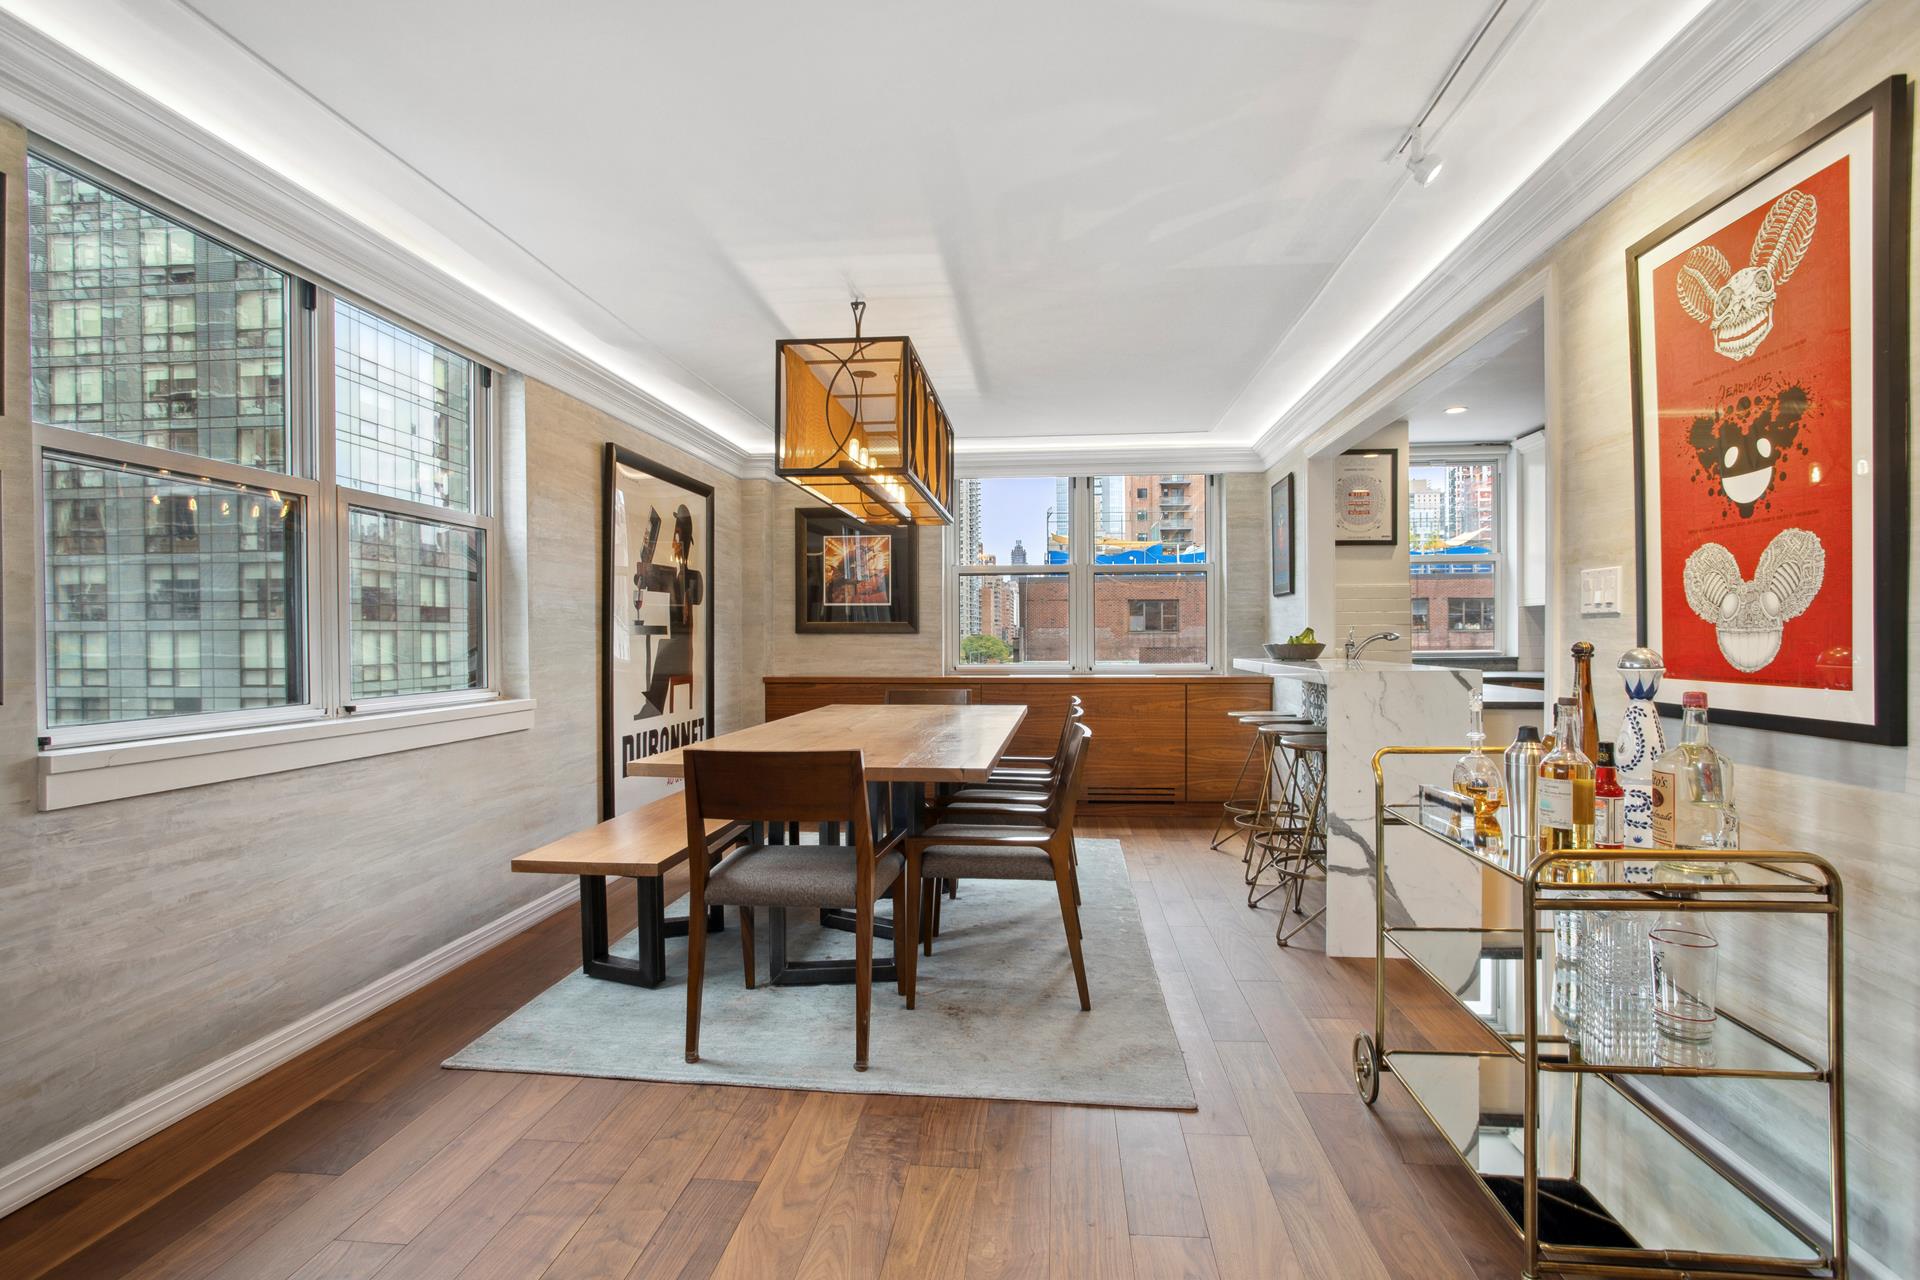 239 East 79th Street 5F, Yorkville, Upper East Side, NYC - 2 Bedrooms  
2 Bathrooms  
5 Rooms - 